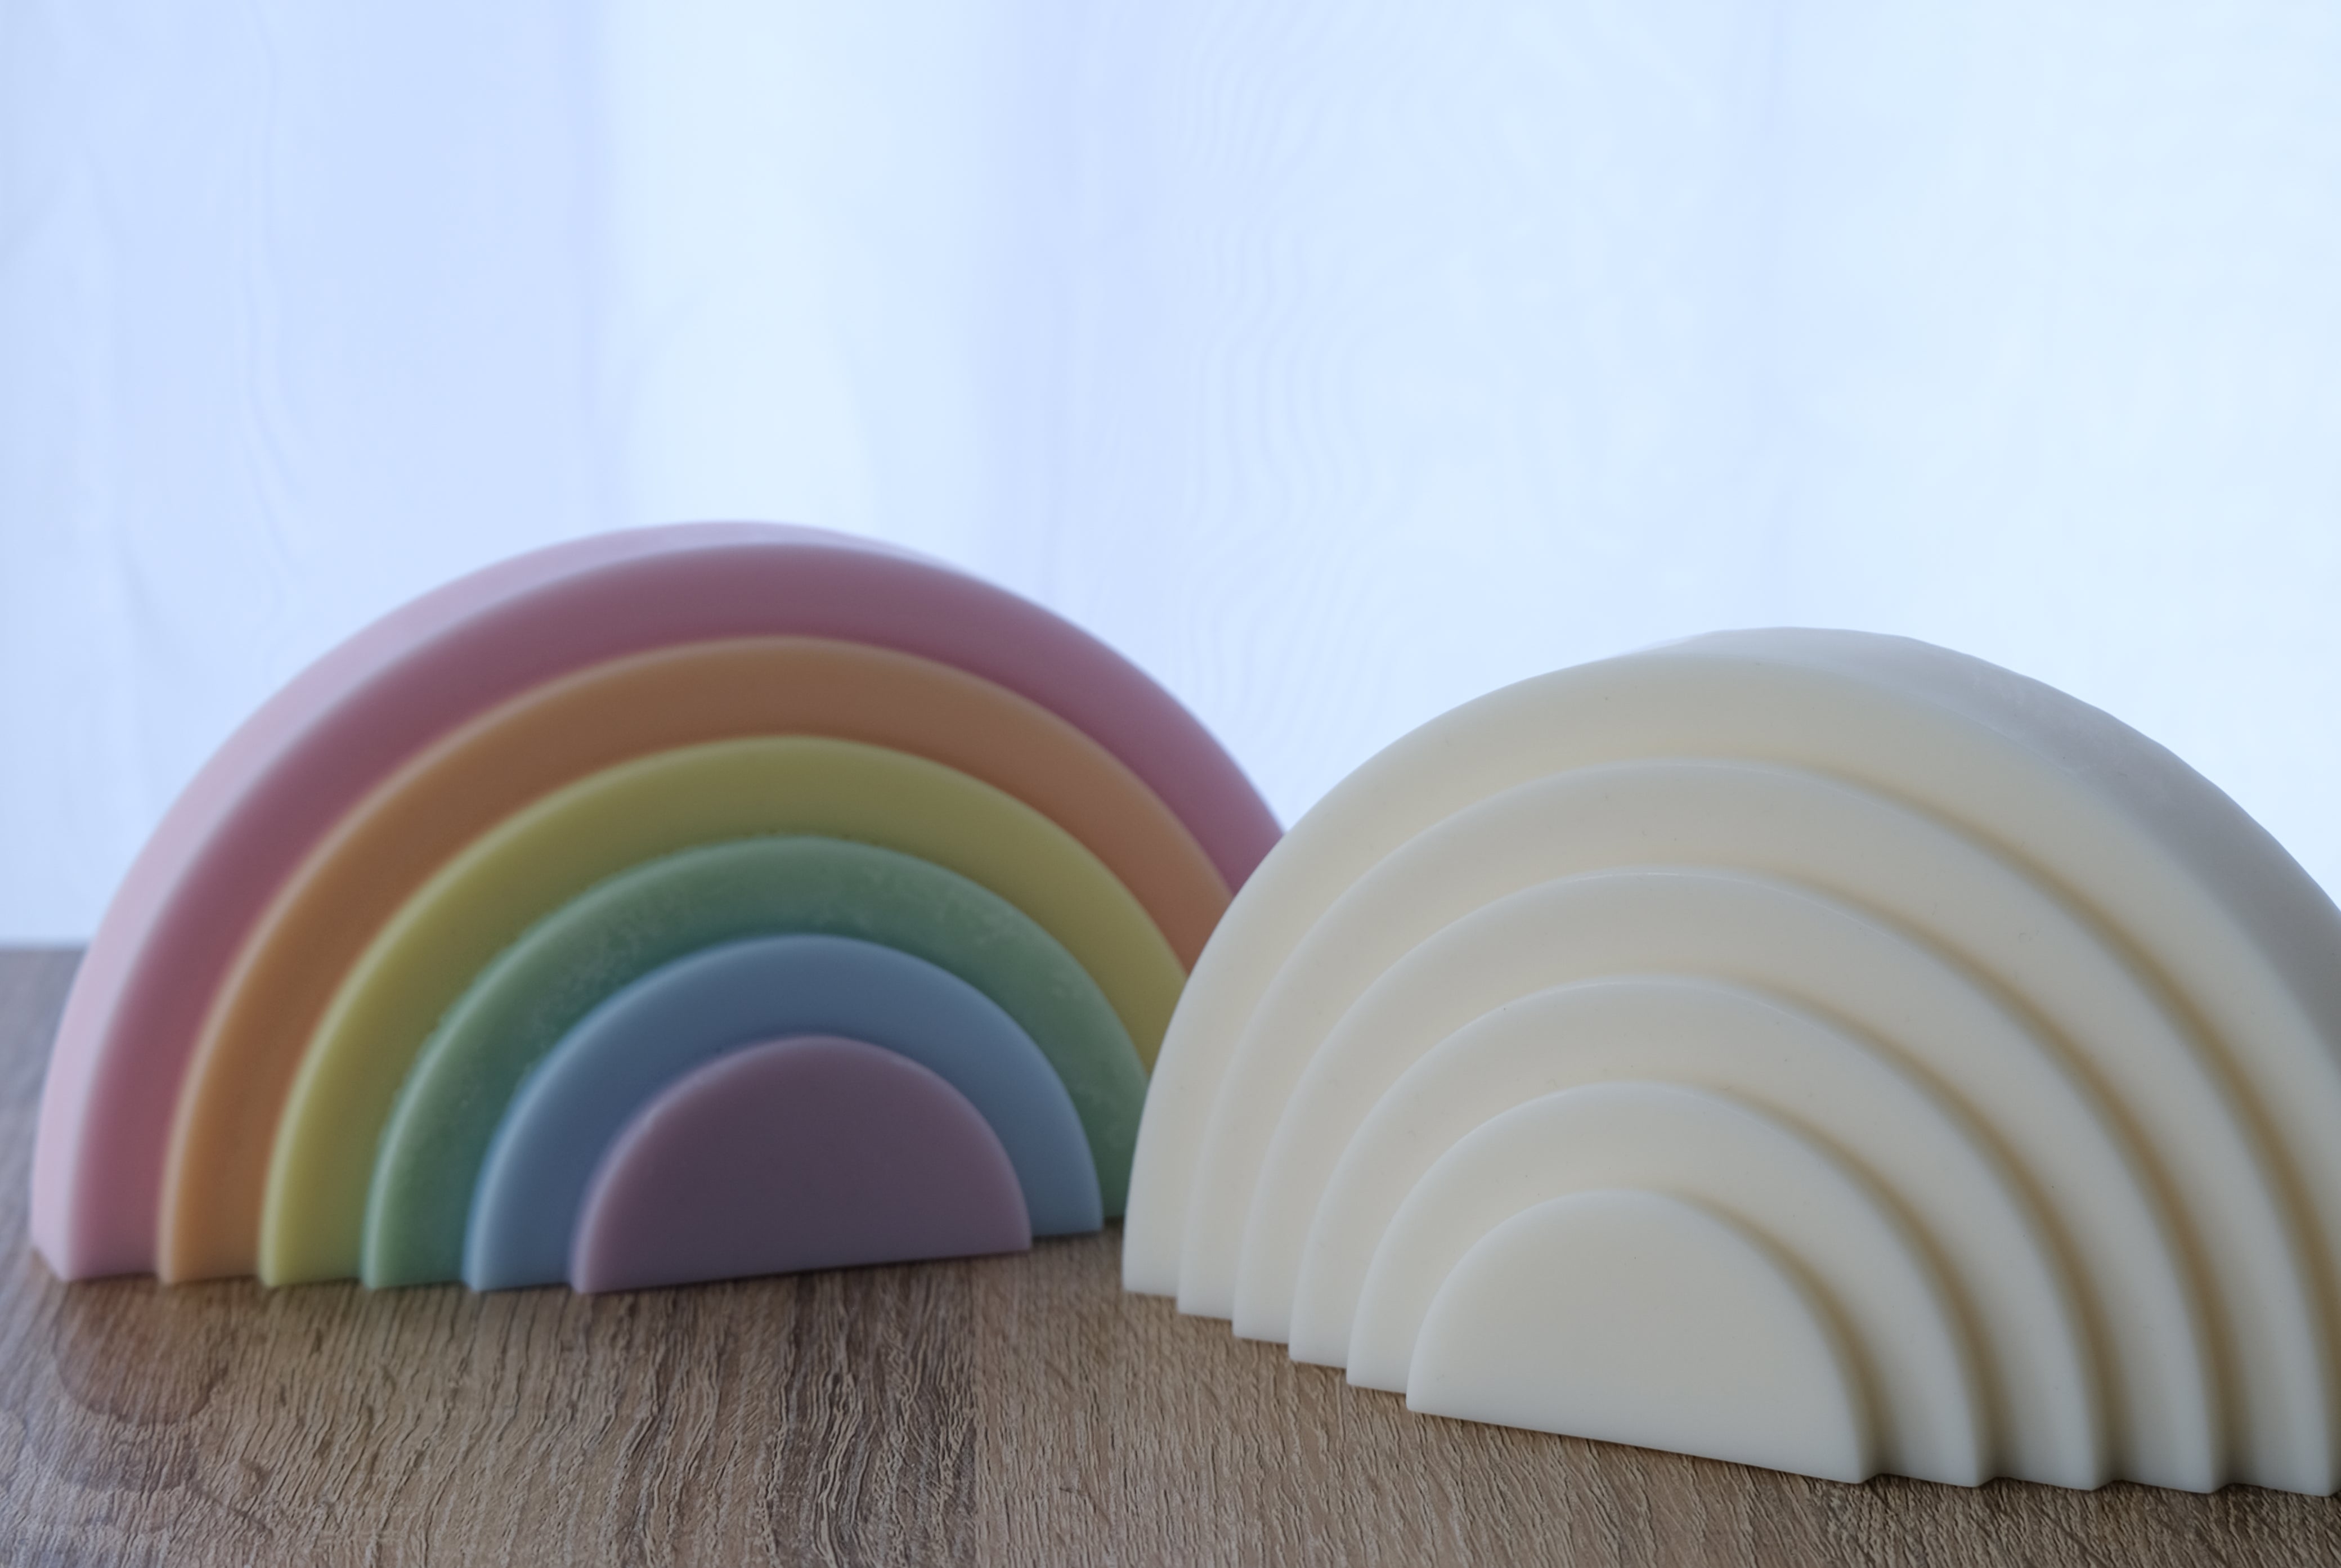 Tiered Rainbow Candle Mould 3 - Silicone Mould, Mold for DIY Candles. Created using candle making kit with cotton candle wicks and candle colour chips. Using soy wax for pillar candles. Sold by Myka Candles Moulds Australia